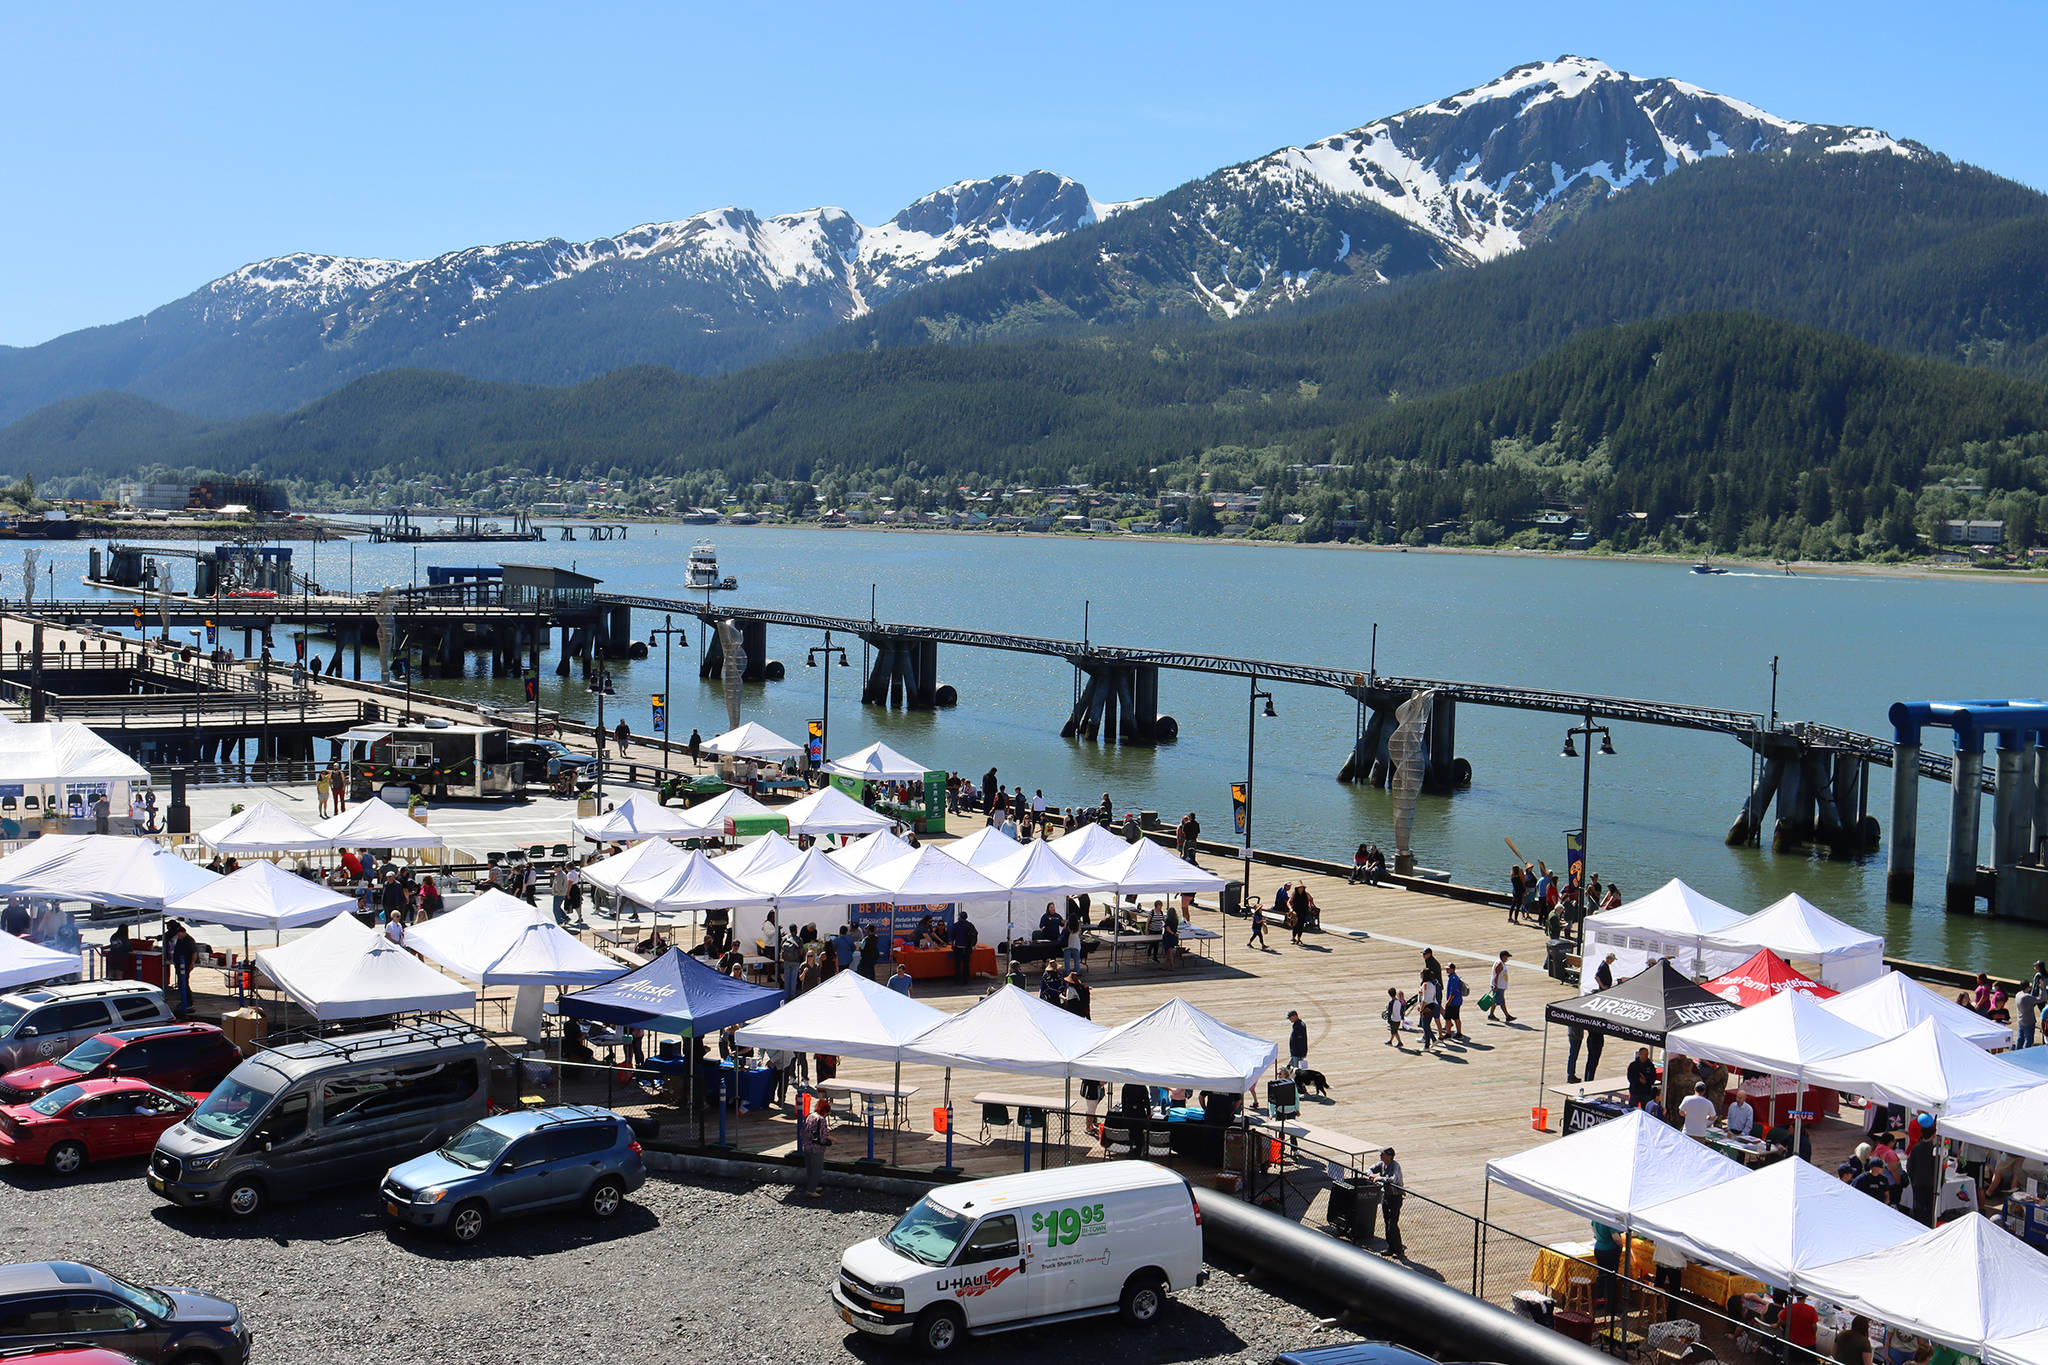 More vendors than ever were part of the 11th edition of the Juneau Maritime Festival held Saturday, according to Juneau Economic Development Council executive director Brian Holst. In total, there were 56 vendors at this year’s event. Holst said about 40 vendors had been a typical number at past iterations of the event that celebrates Juneau’s maritime culture. (Ben Hohenstatt / Juneau Empire)